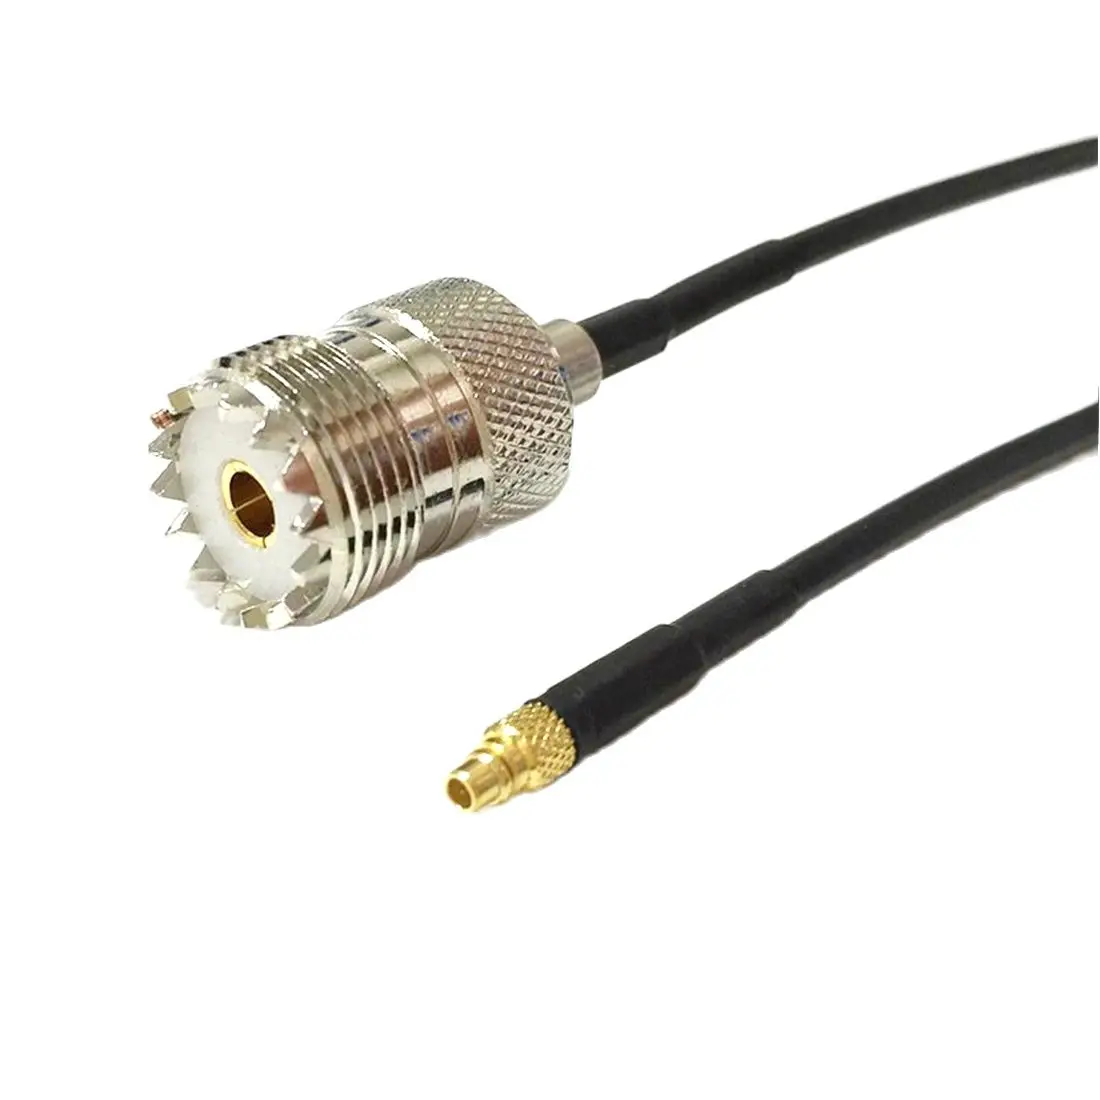 New Modem Coaxial Cable UHF Female Jack Connector Switch MMCX Male Plug Connector RG174 Cable 20CM 8inch Adapter yytcg hifi 4 4mm to 3 5mm audio cable silver plated 4 4mm balance to 3 5 mm aux jack balanced audio adapter cable male to male